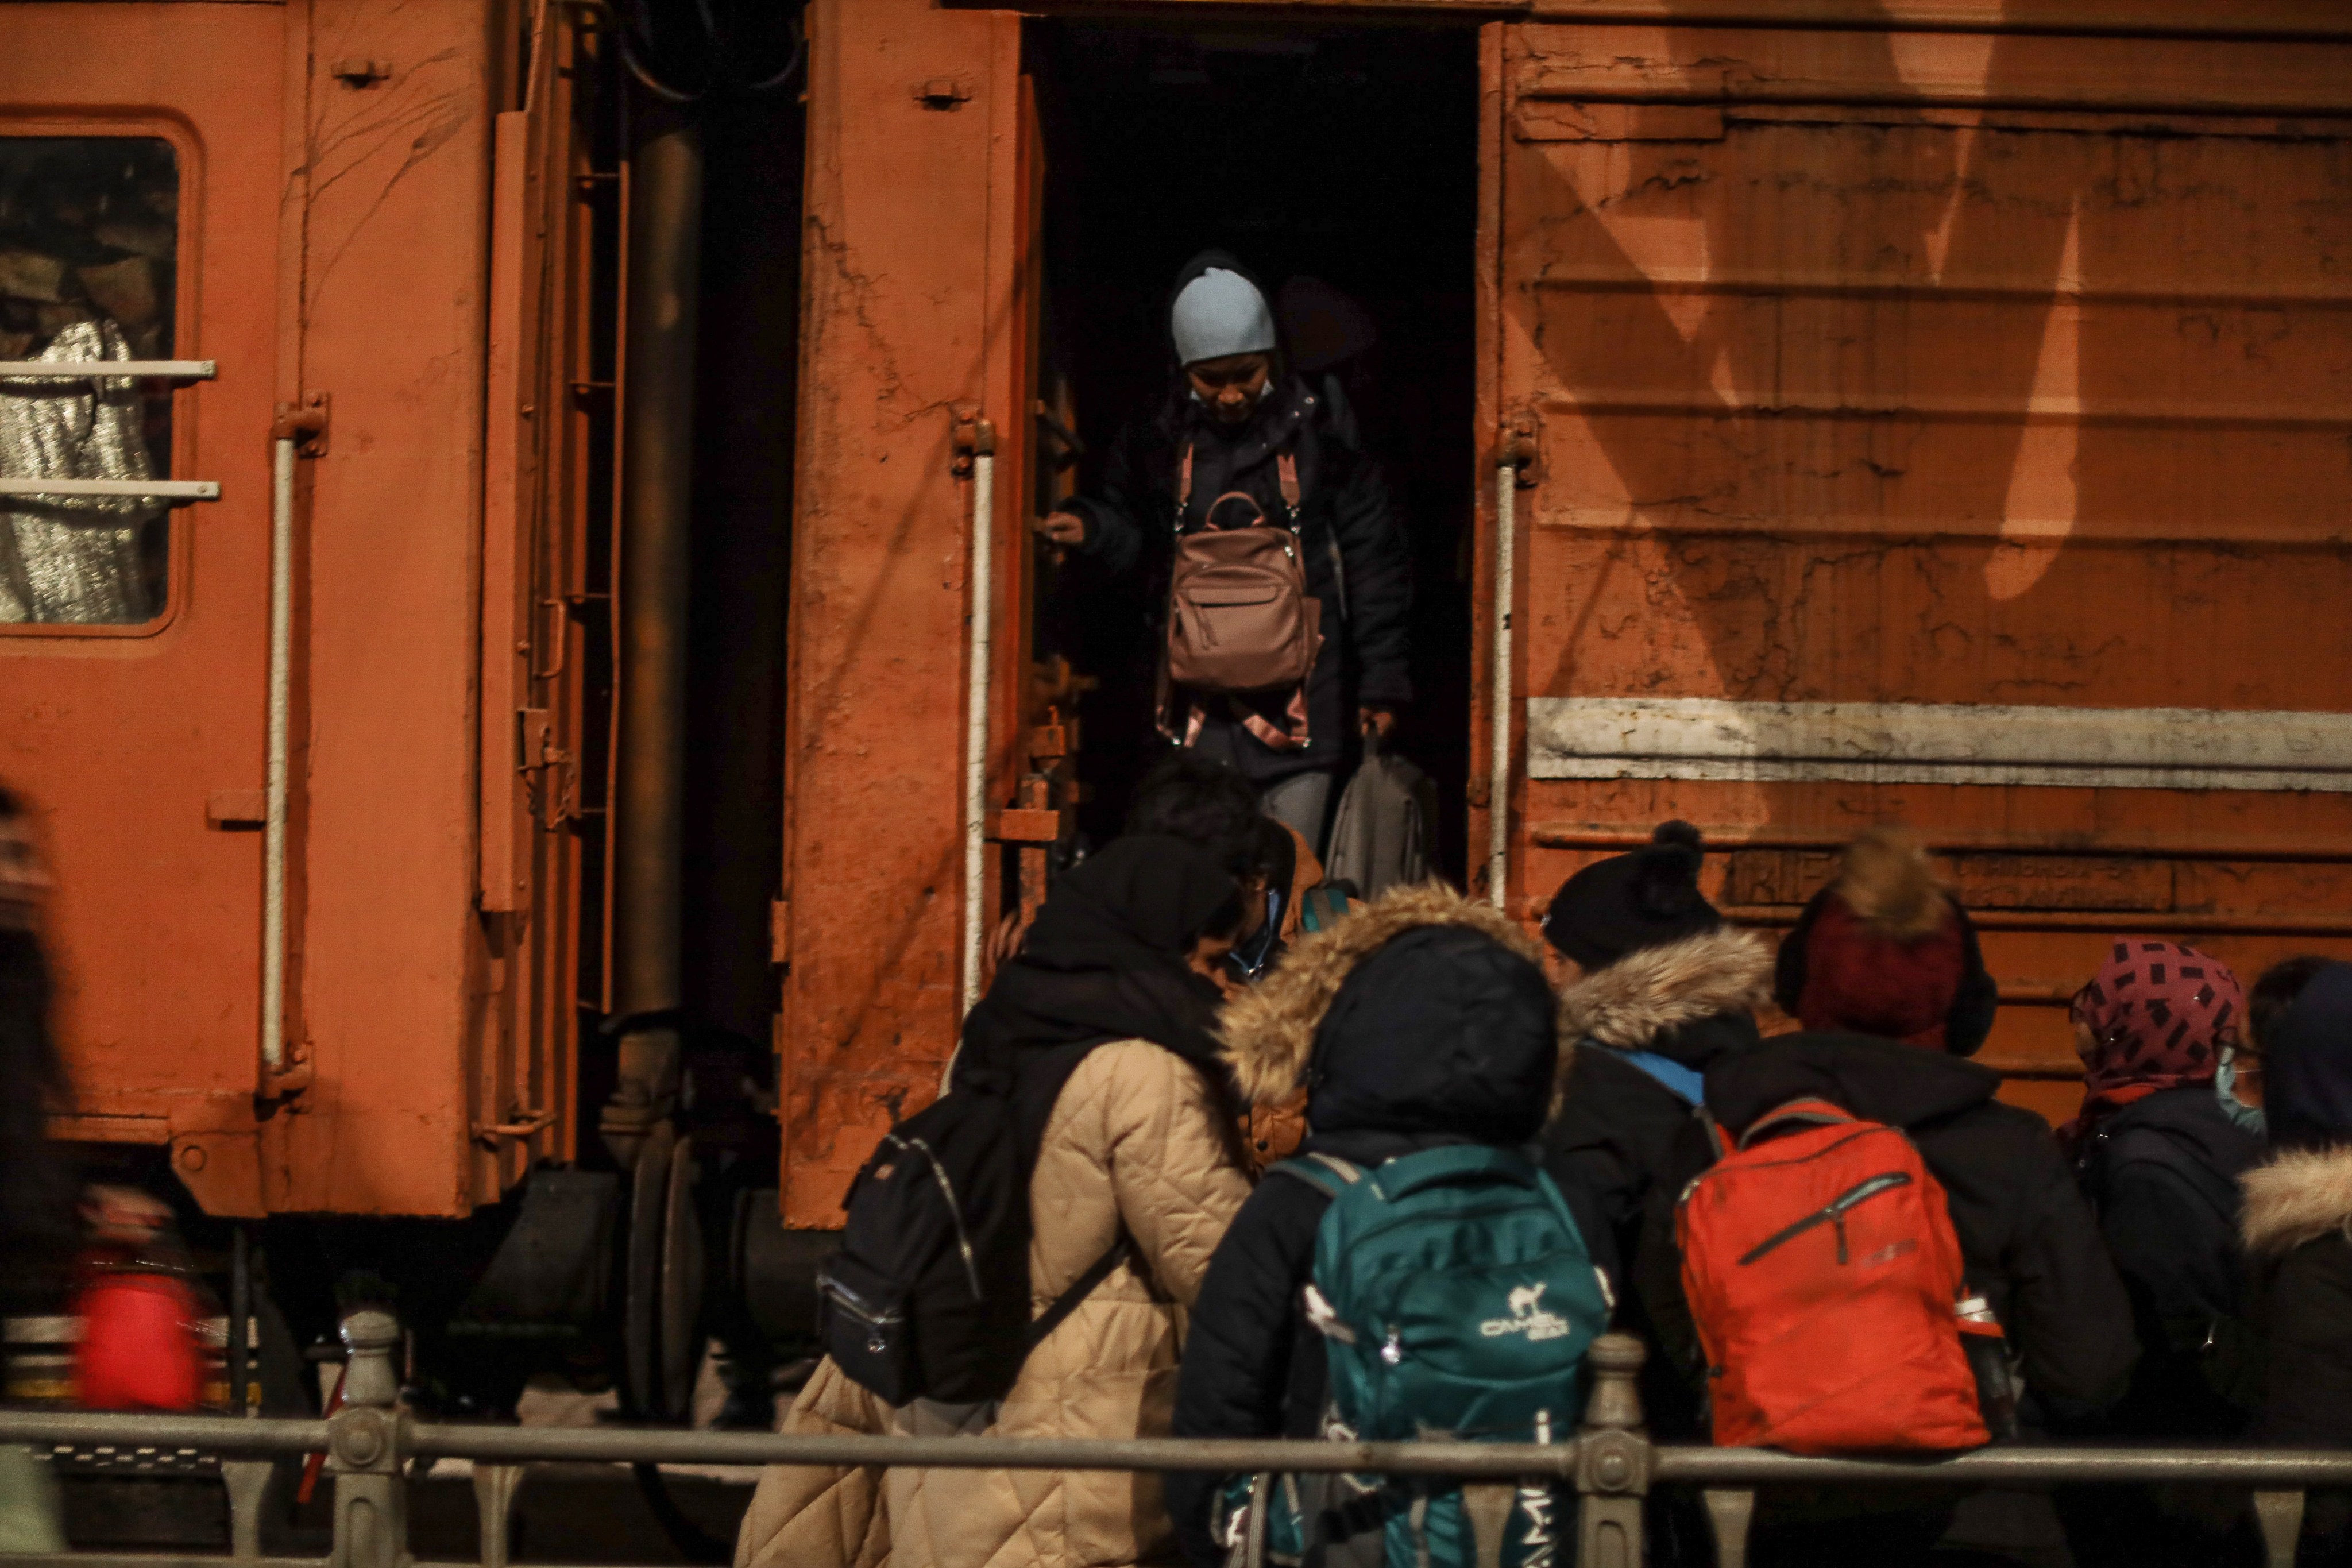 A group of Indian exchange students disembark a train from Kharkiv at the Lviv-Holovnyi railway station in Lviv, Ukraine, on Thursday, March 3, 2022. Photo: Bloomberg